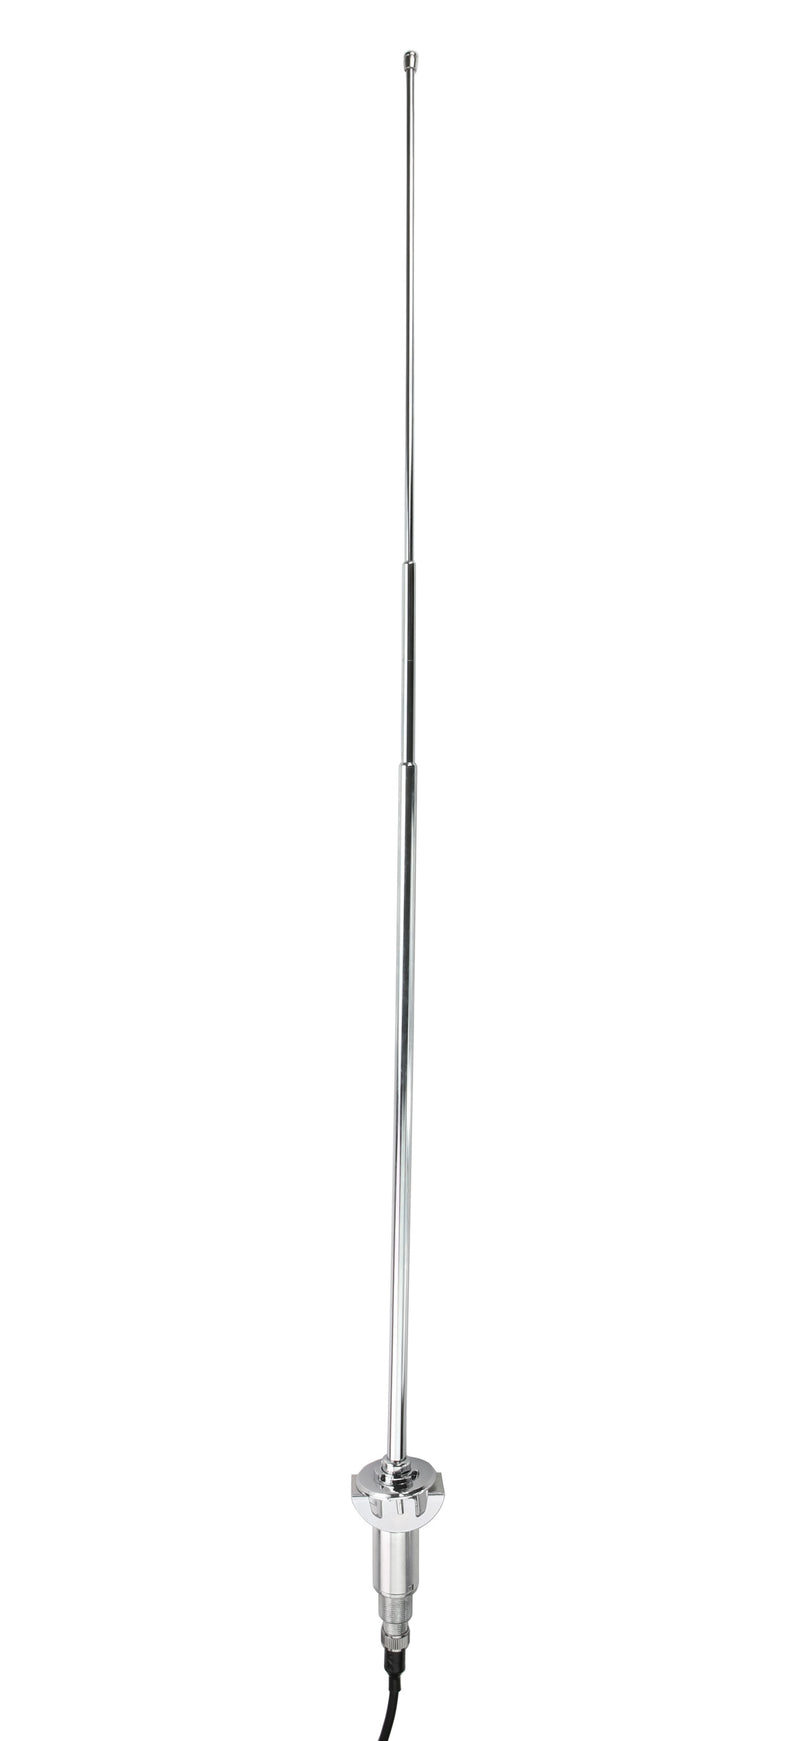 1968-71 Plymouth Belvedere Replacement Antenna